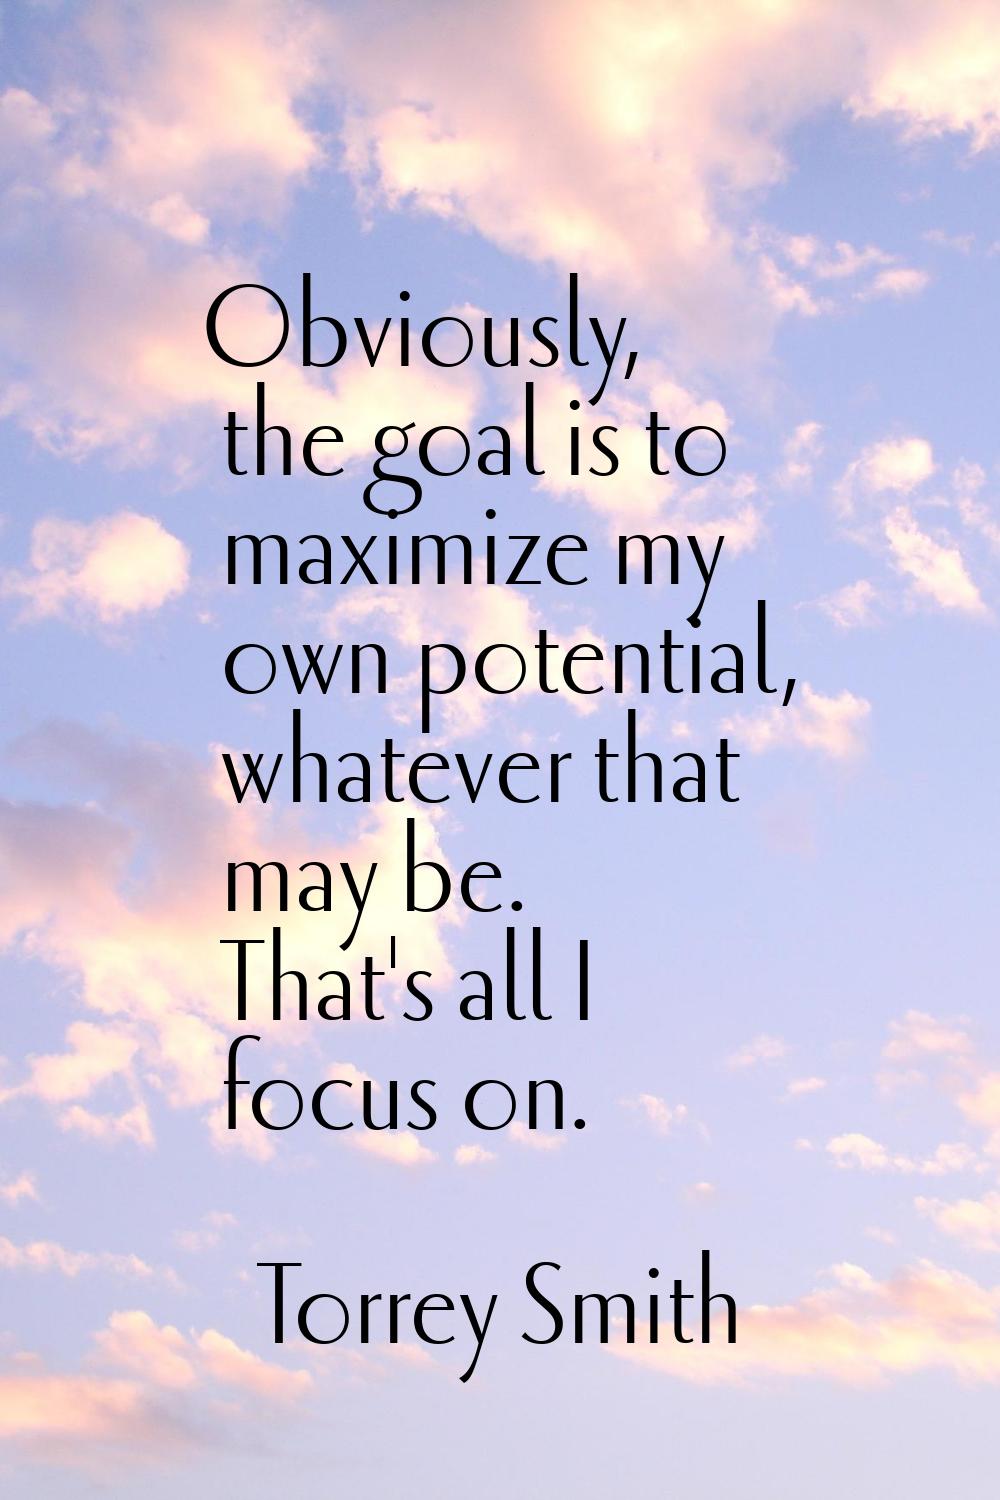 Obviously, the goal is to maximize my own potential, whatever that may be. That's all I focus on.